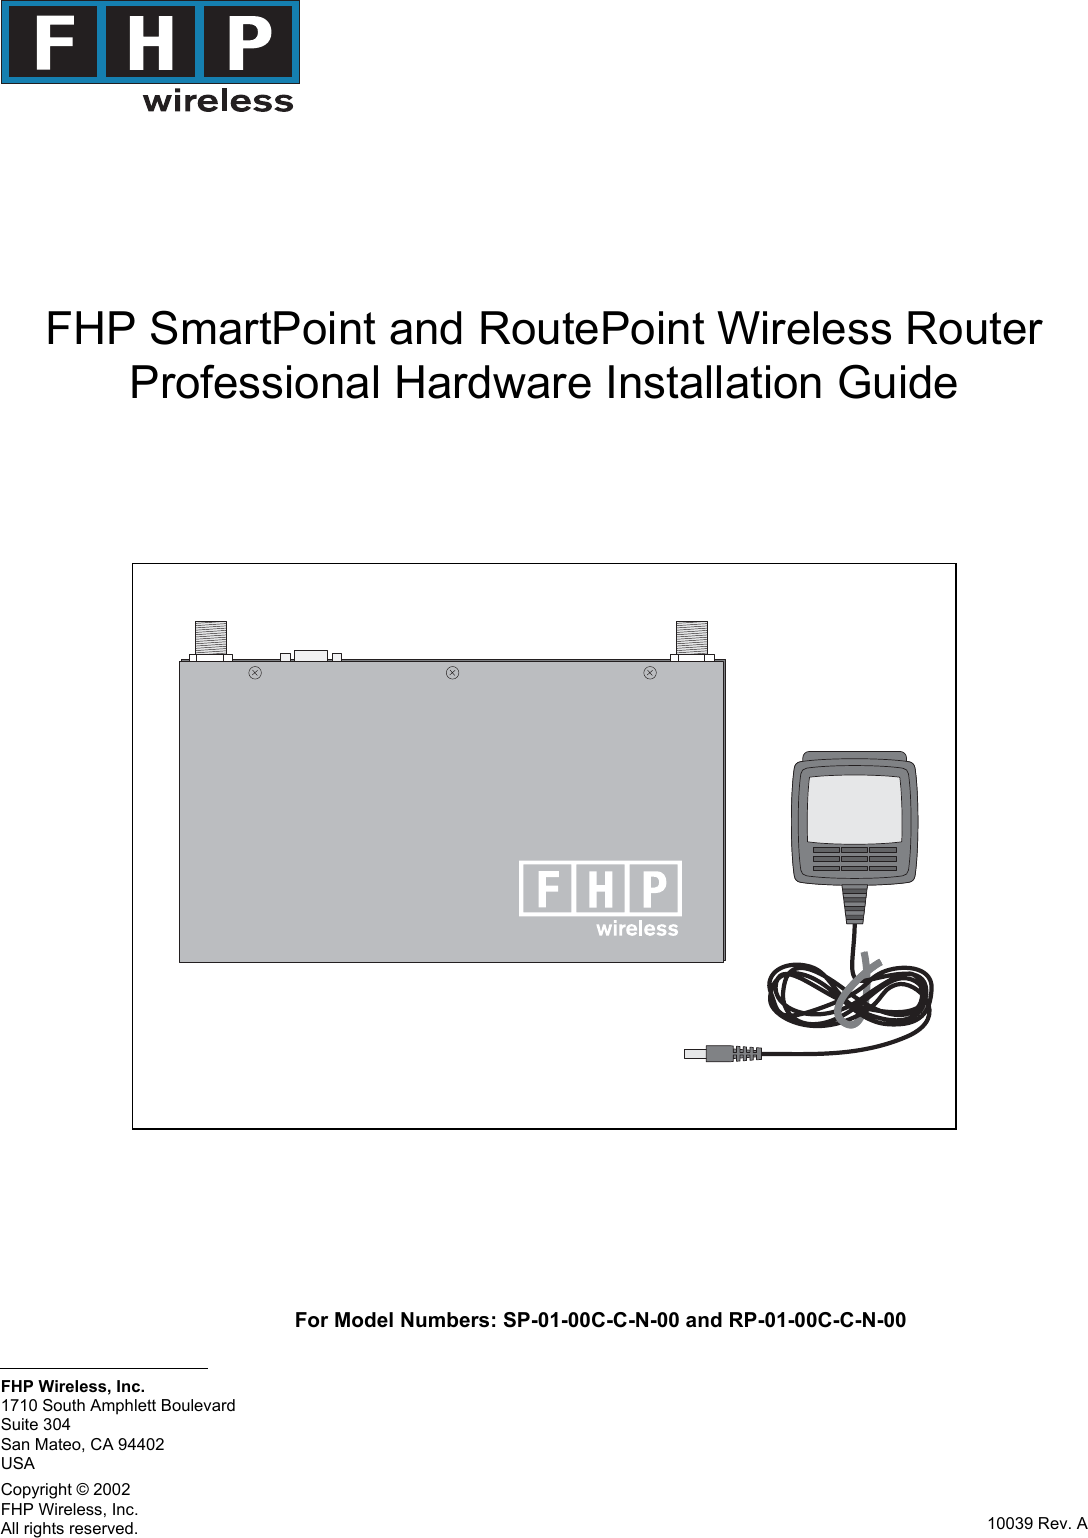 10039 Rev. AFHP Wireless, Inc.All rights reserved.Suite 304San Mateo, CA 94402USA1710 South Amphlett BoulevardFHP Wireless, Inc.Copyright © 2002FHP SmartPoint and RoutePoint Wireless RouterProfessional Hardware Installation GuideFor Model Numbers: SP-01-00C-C-N-00 and RP-01-00C-C-N-00